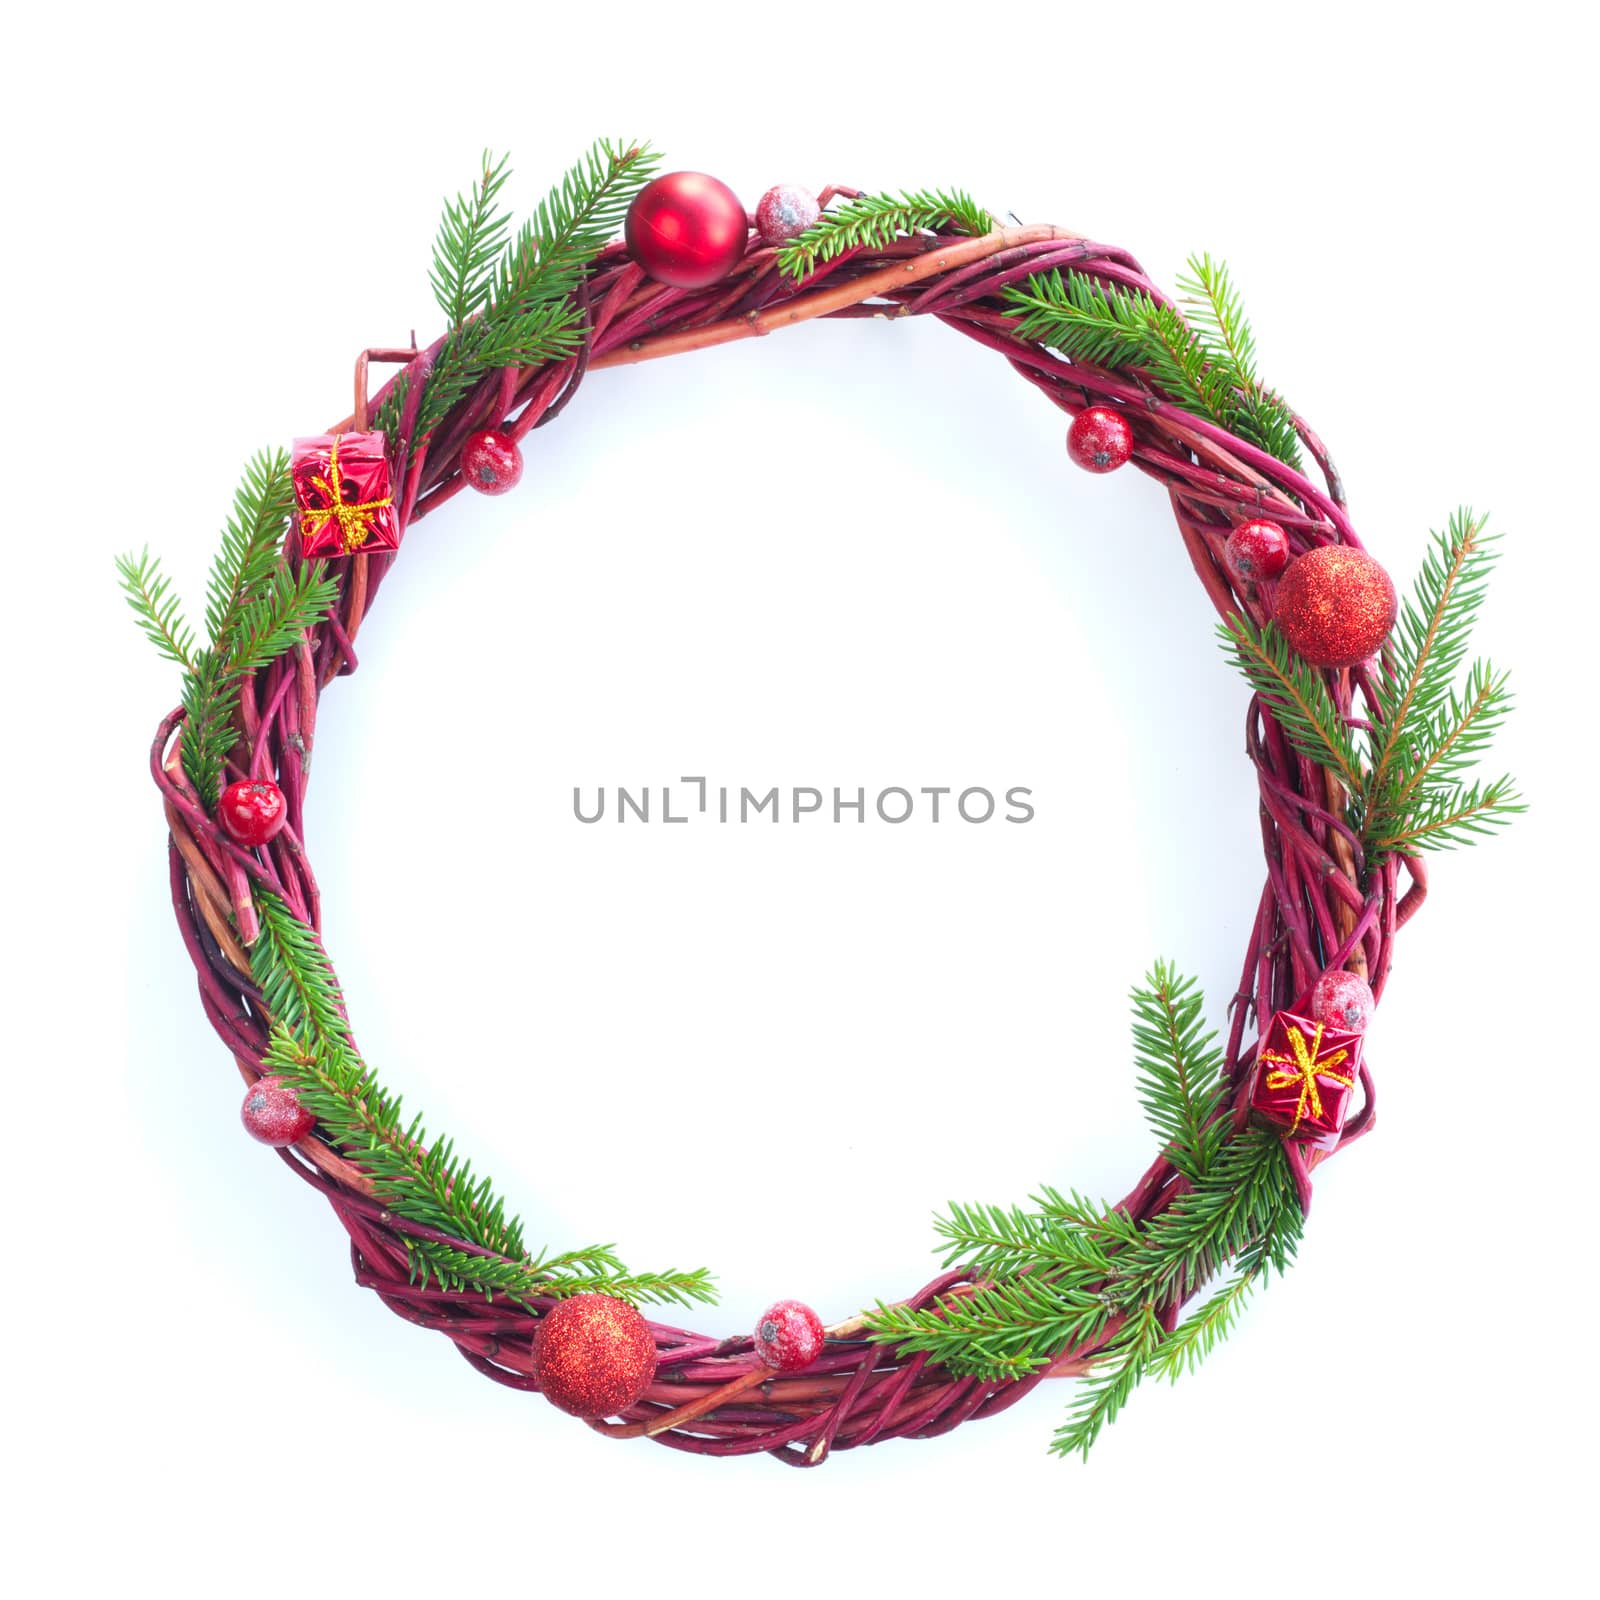 Christmas wreath of fir tree branches and red berries isolated on white background copy space for text border frame for text